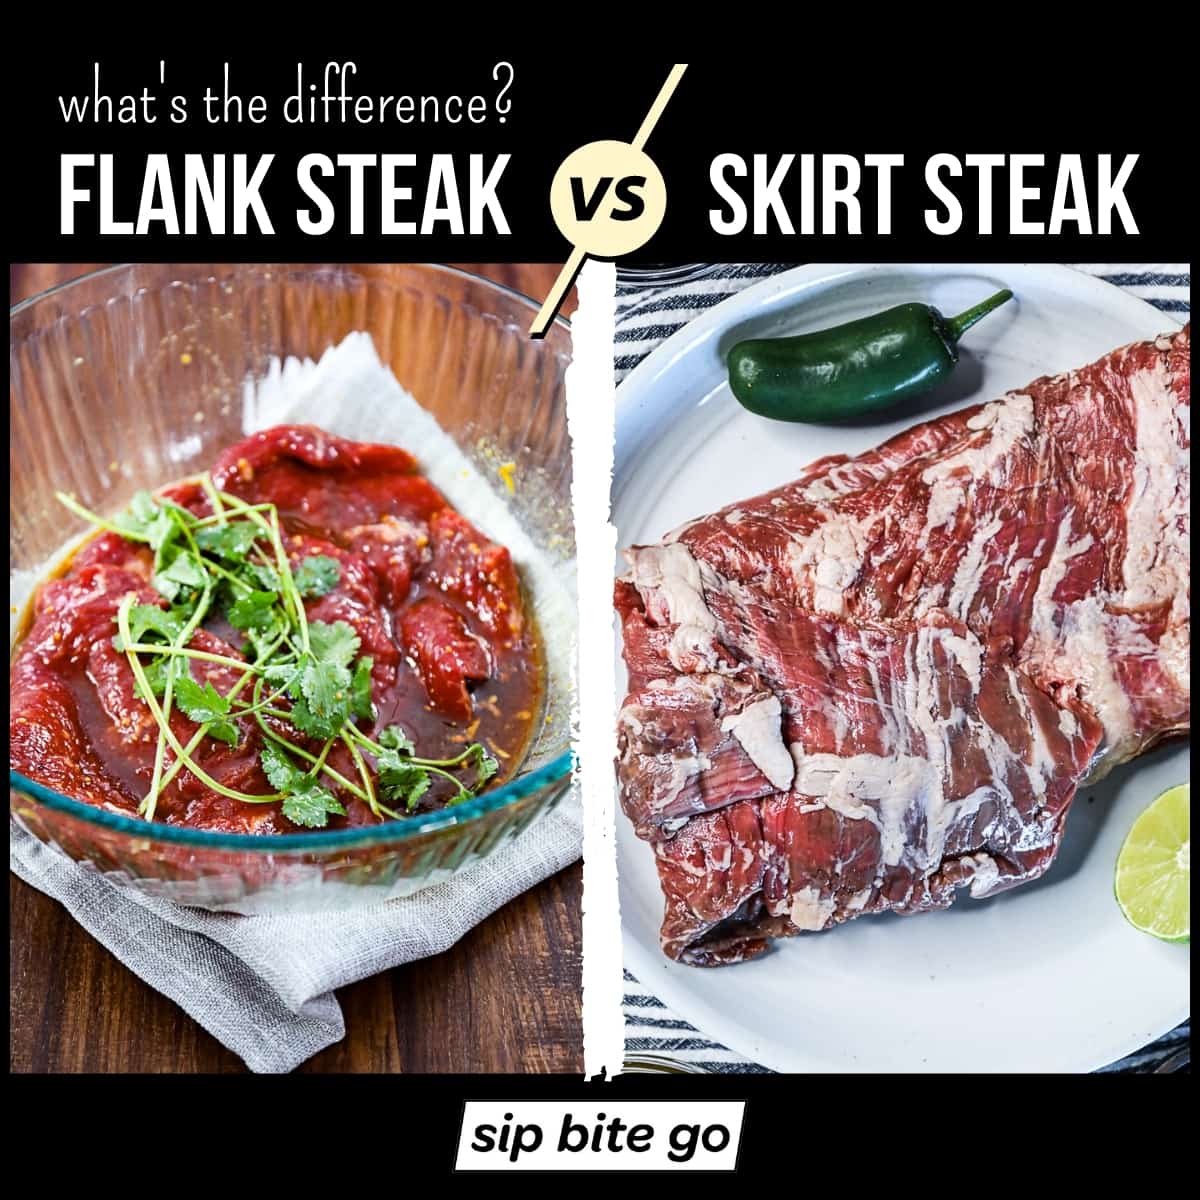 Skirt Steak Vs Flank Steak Infographic chart with raw beef cut examples comparison with captions.